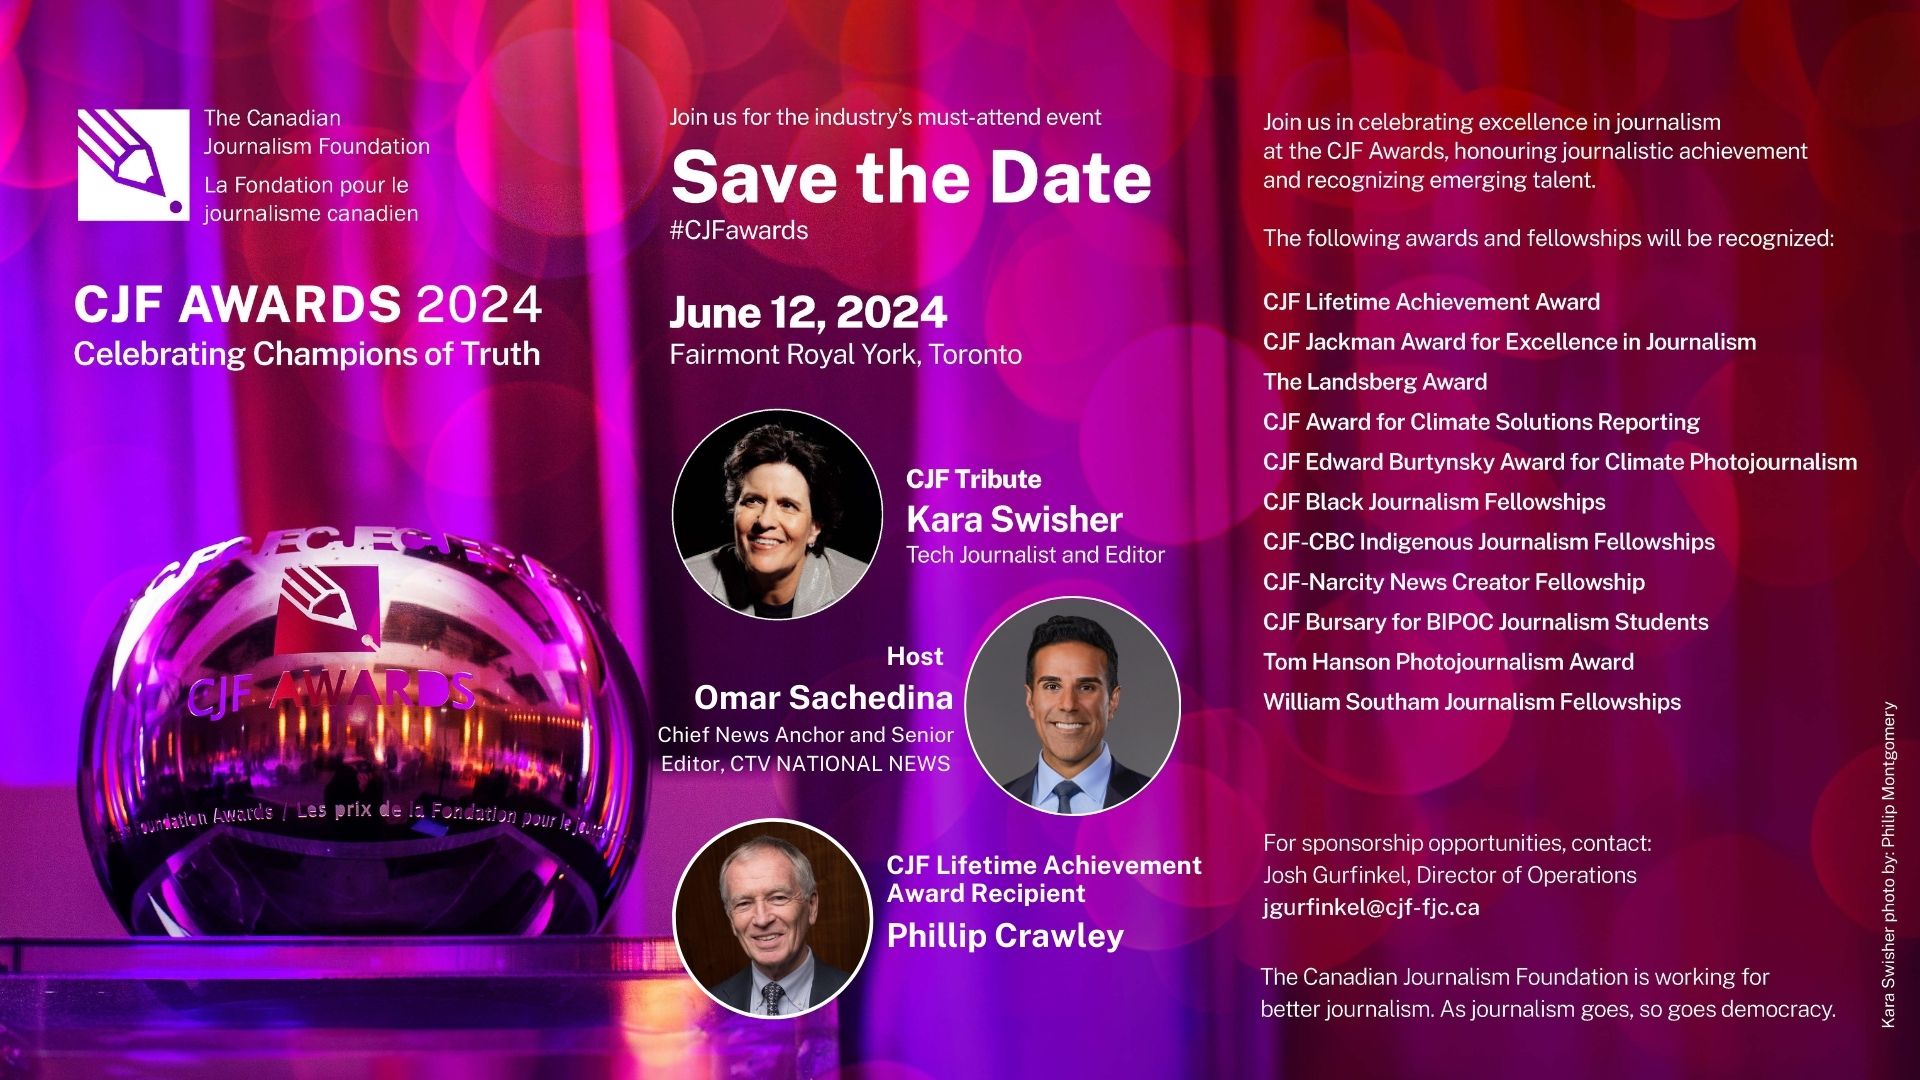 CJF Awards 2024 Save the Date June 12 2024